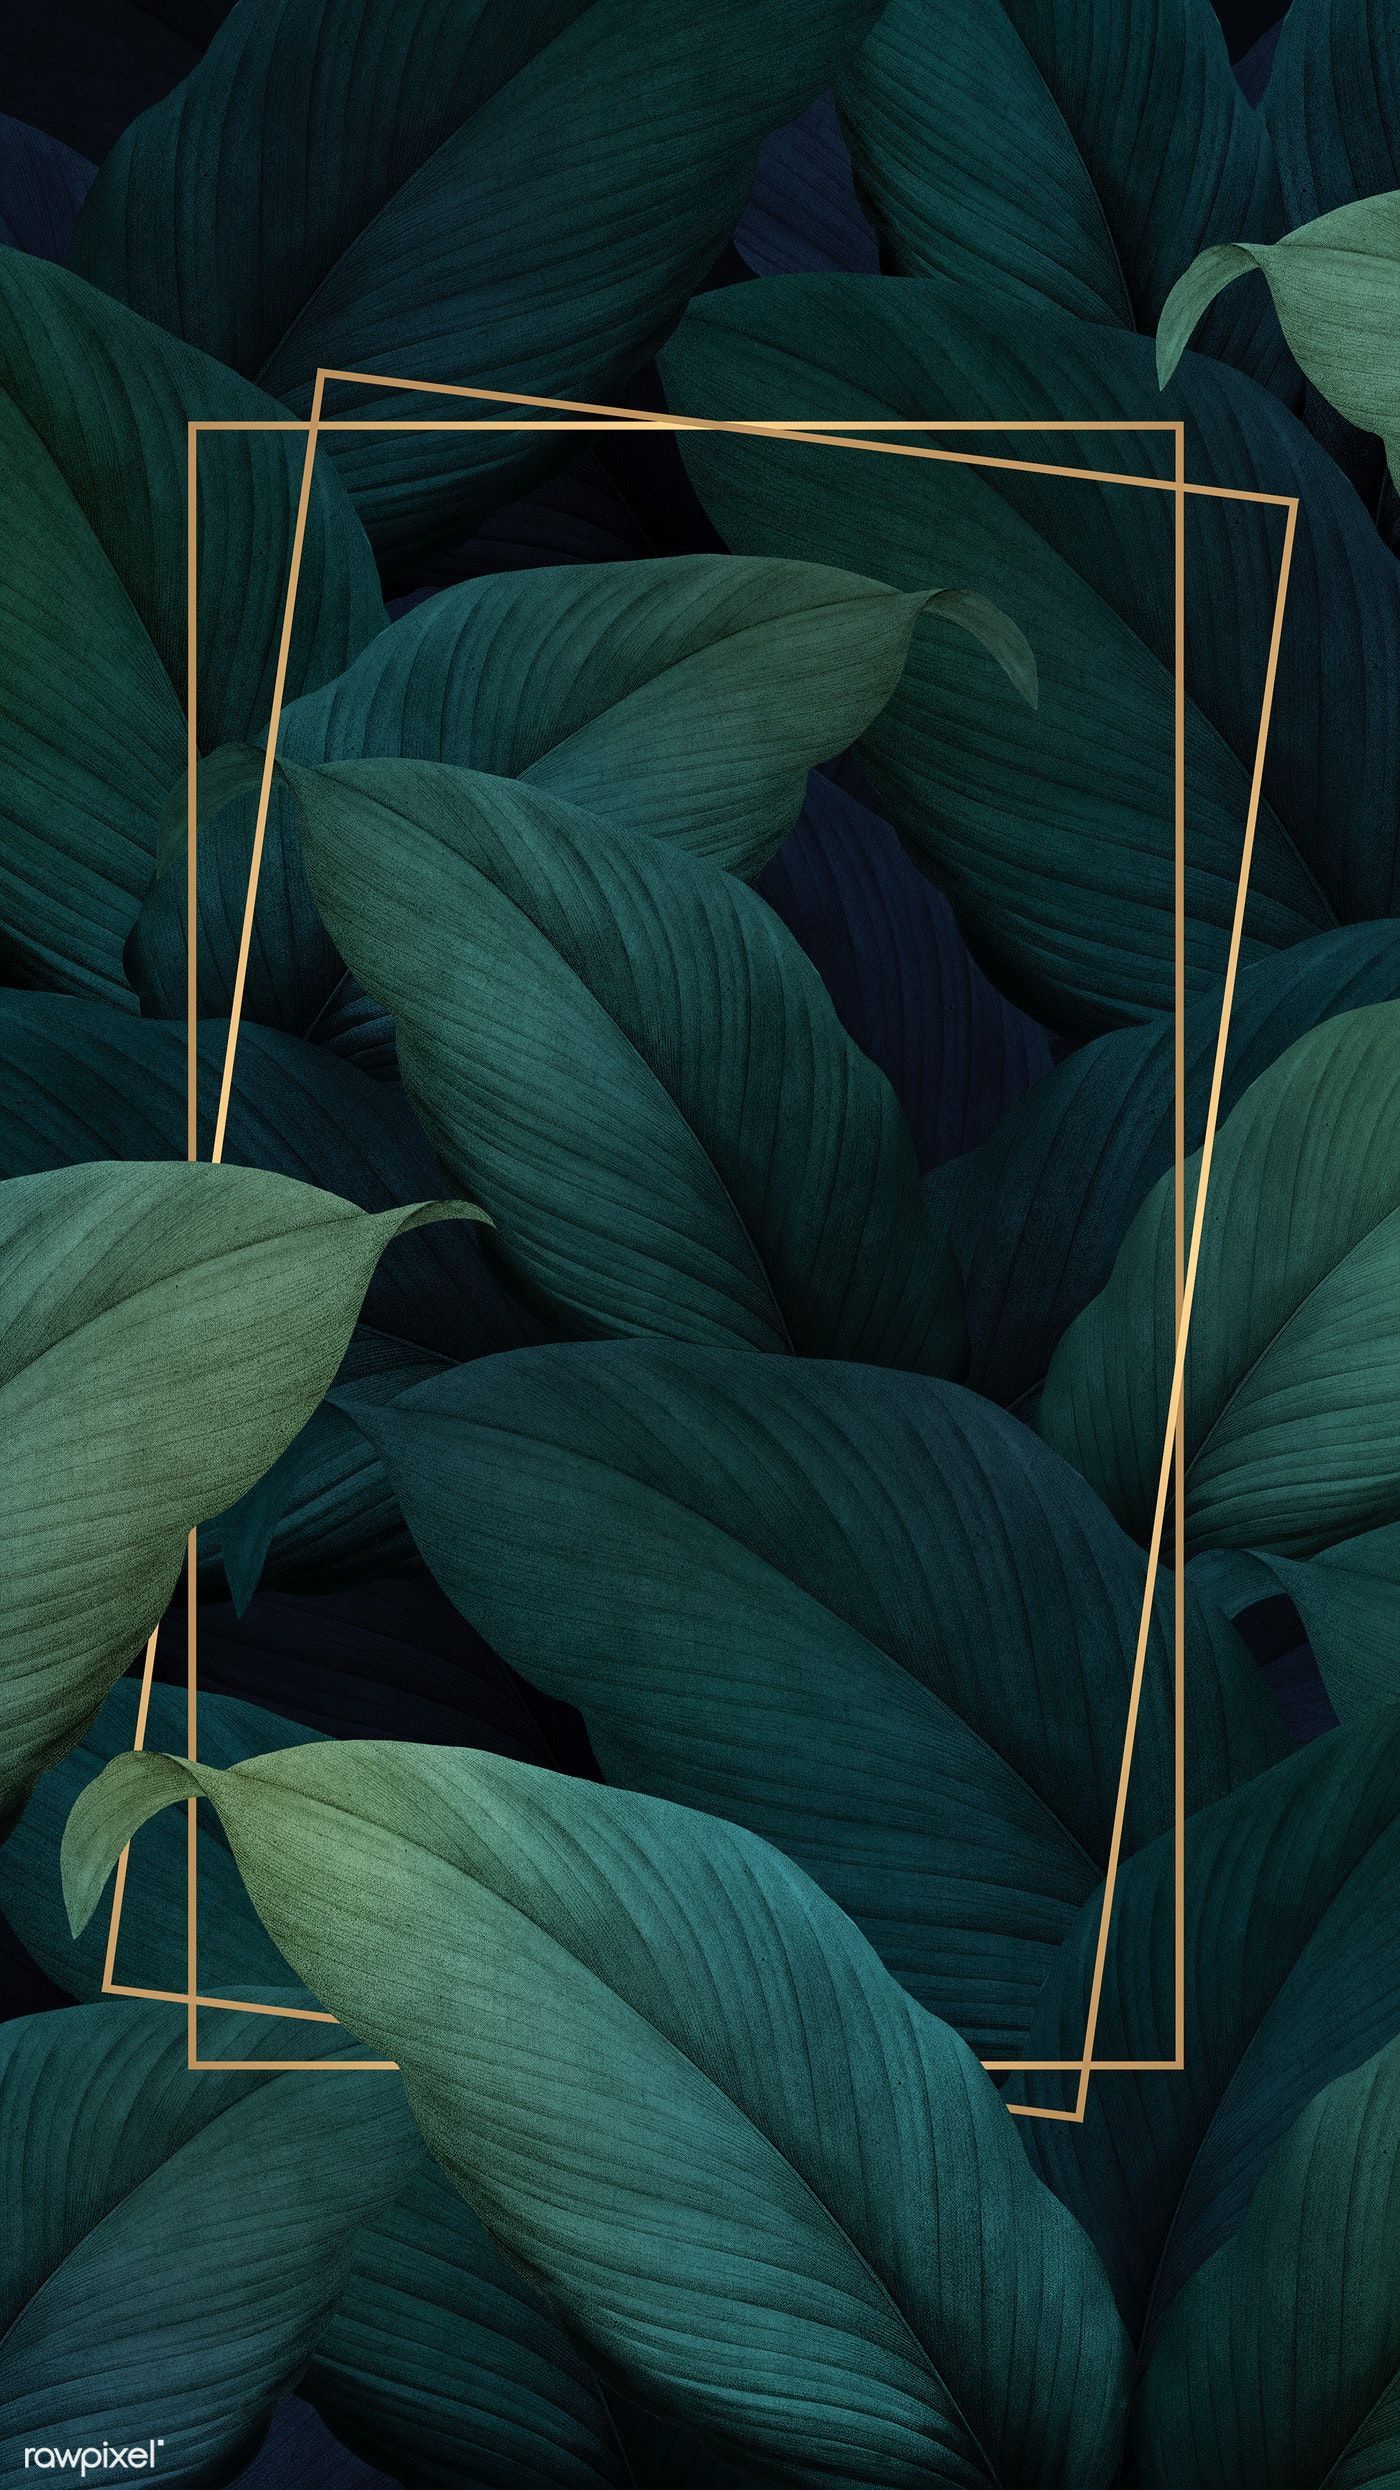 A green leafy background with gold frames - Leaves, tropical